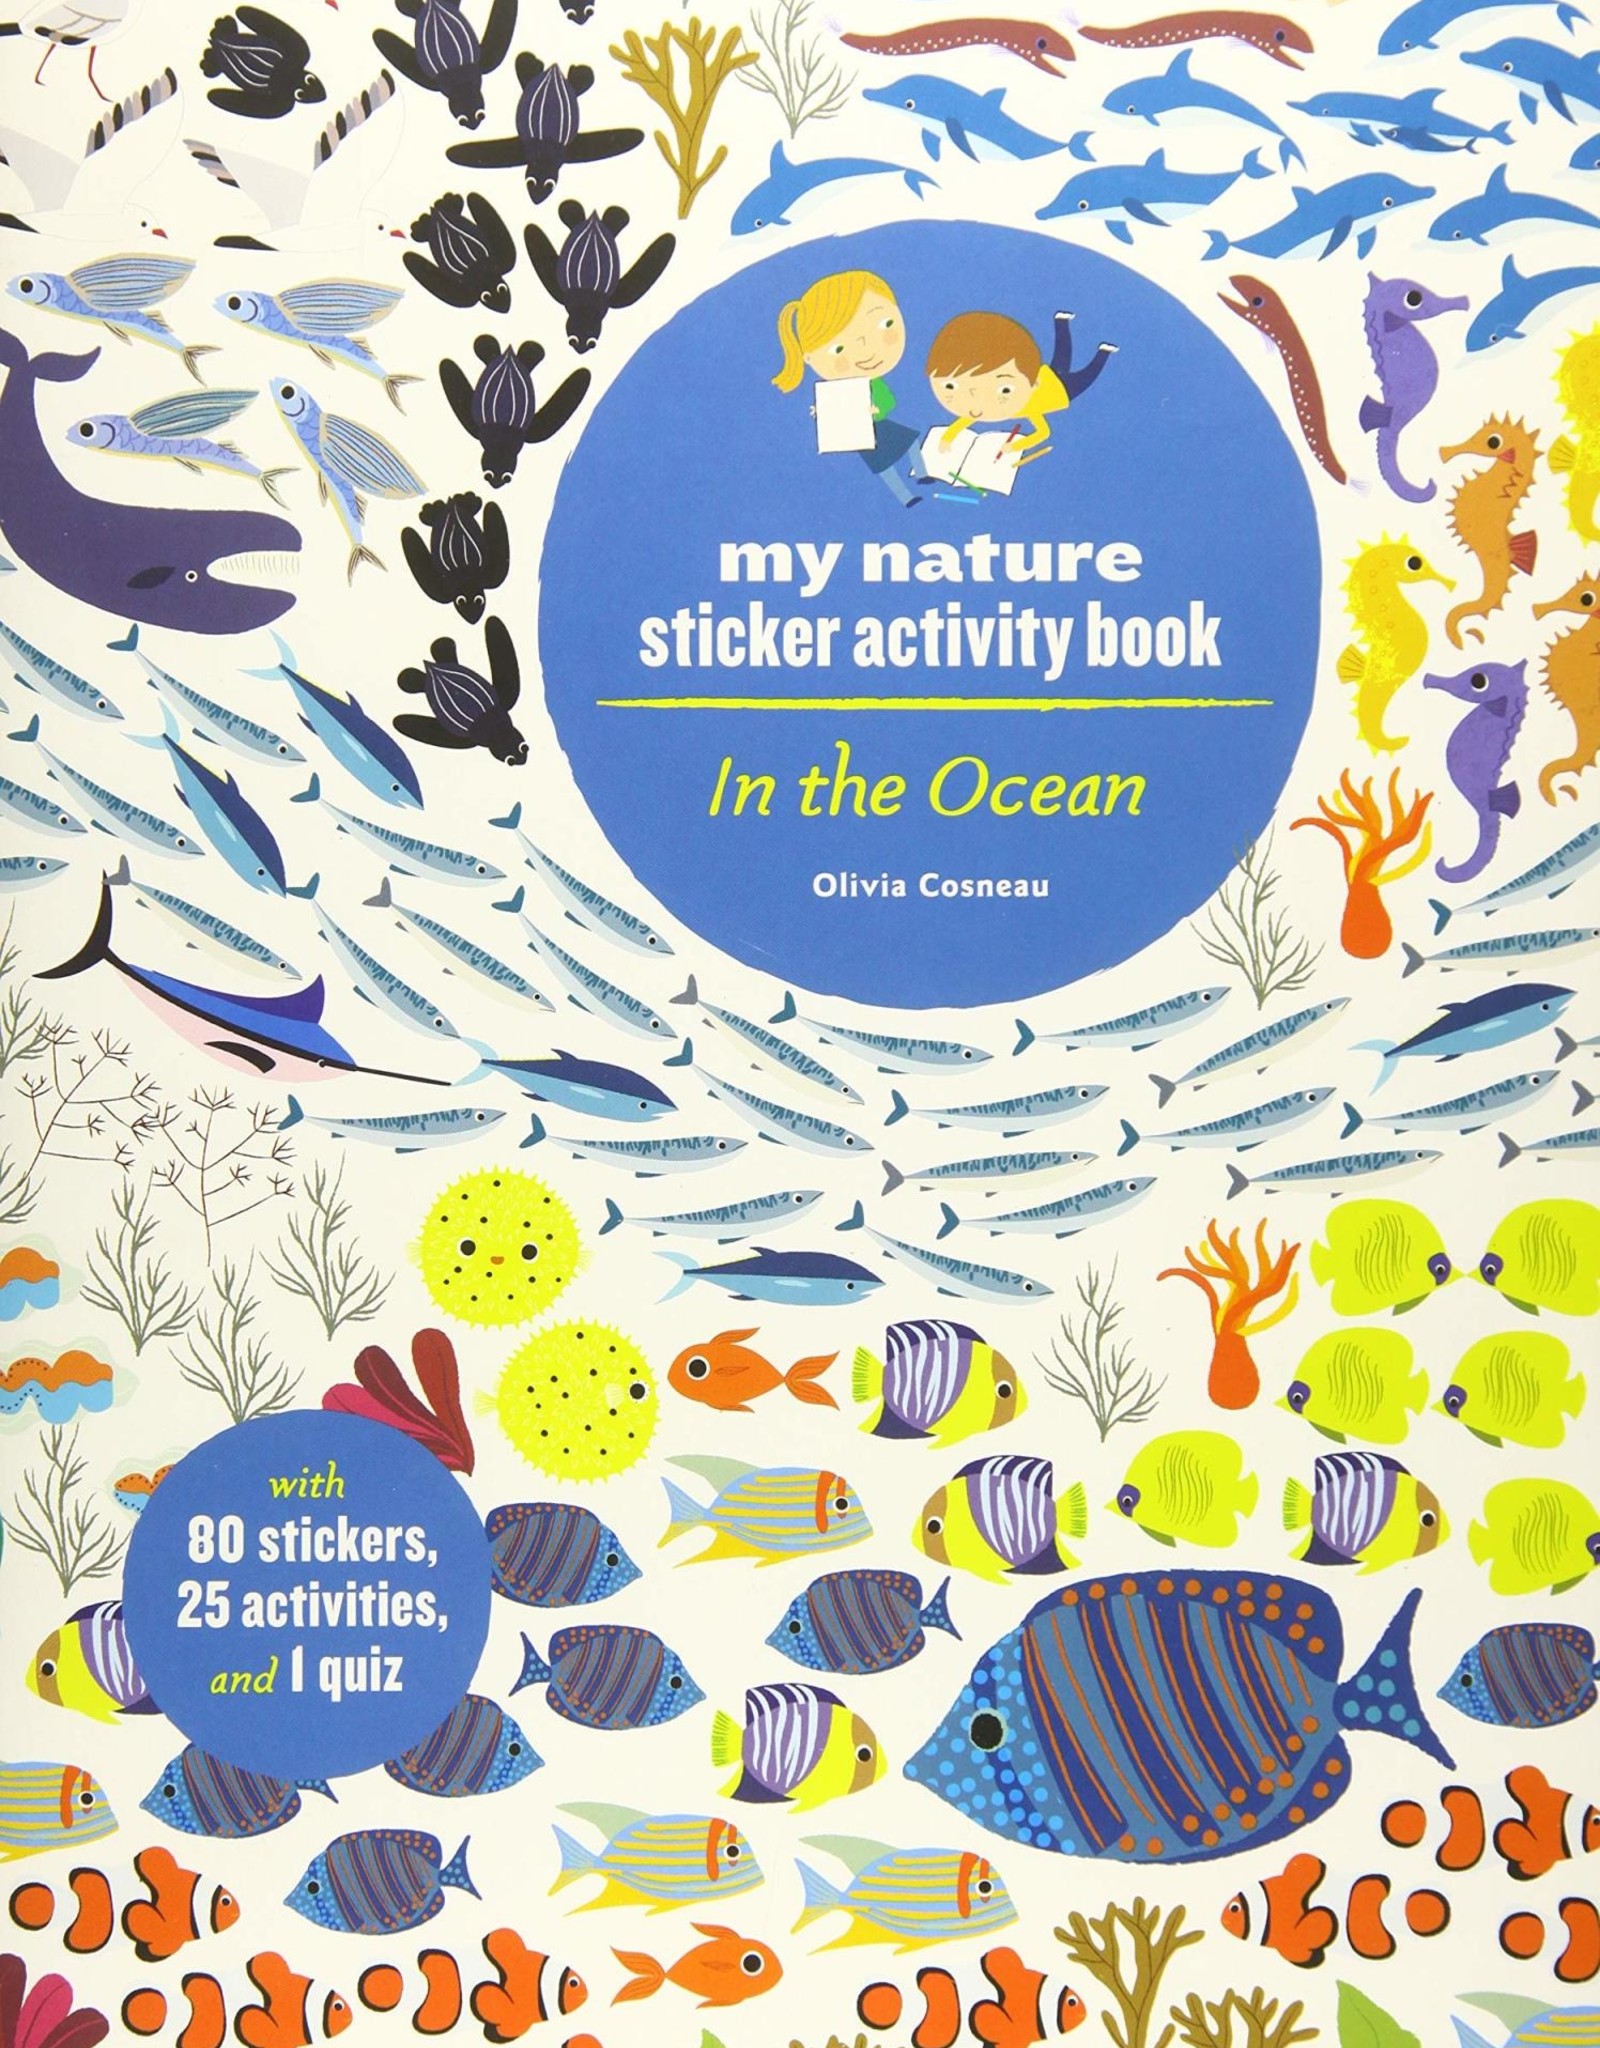 My Nature Sticker Activity Book - In the Ocean